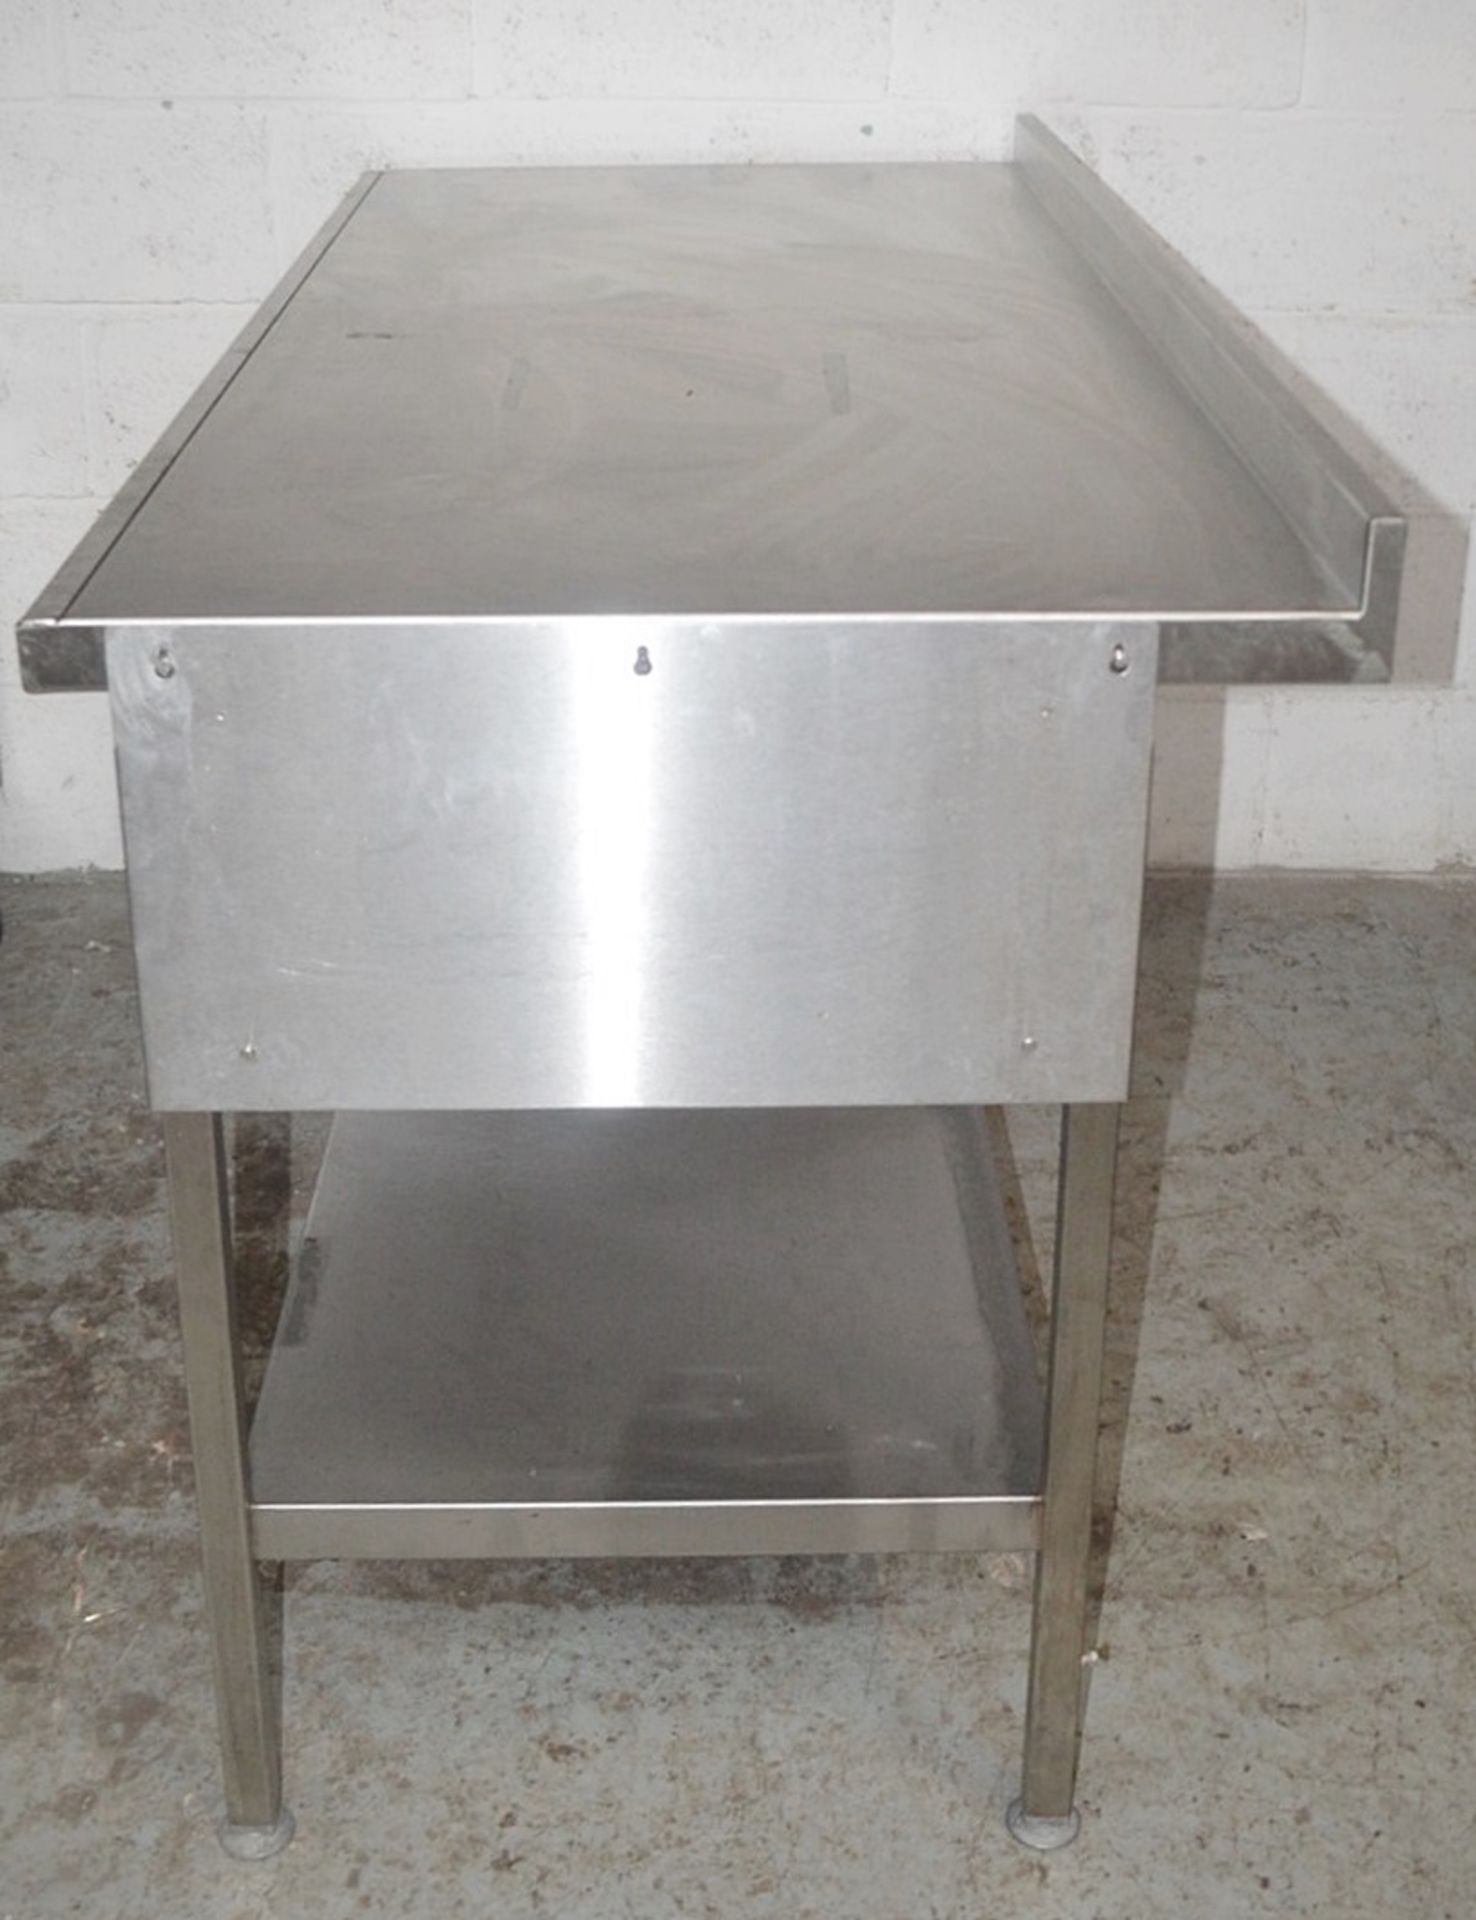 1 x Stainless Steel Commercial Kitchen Prep Counter With Drawer And Upstand - Dimensions: H86 x W150 - Image 4 of 5